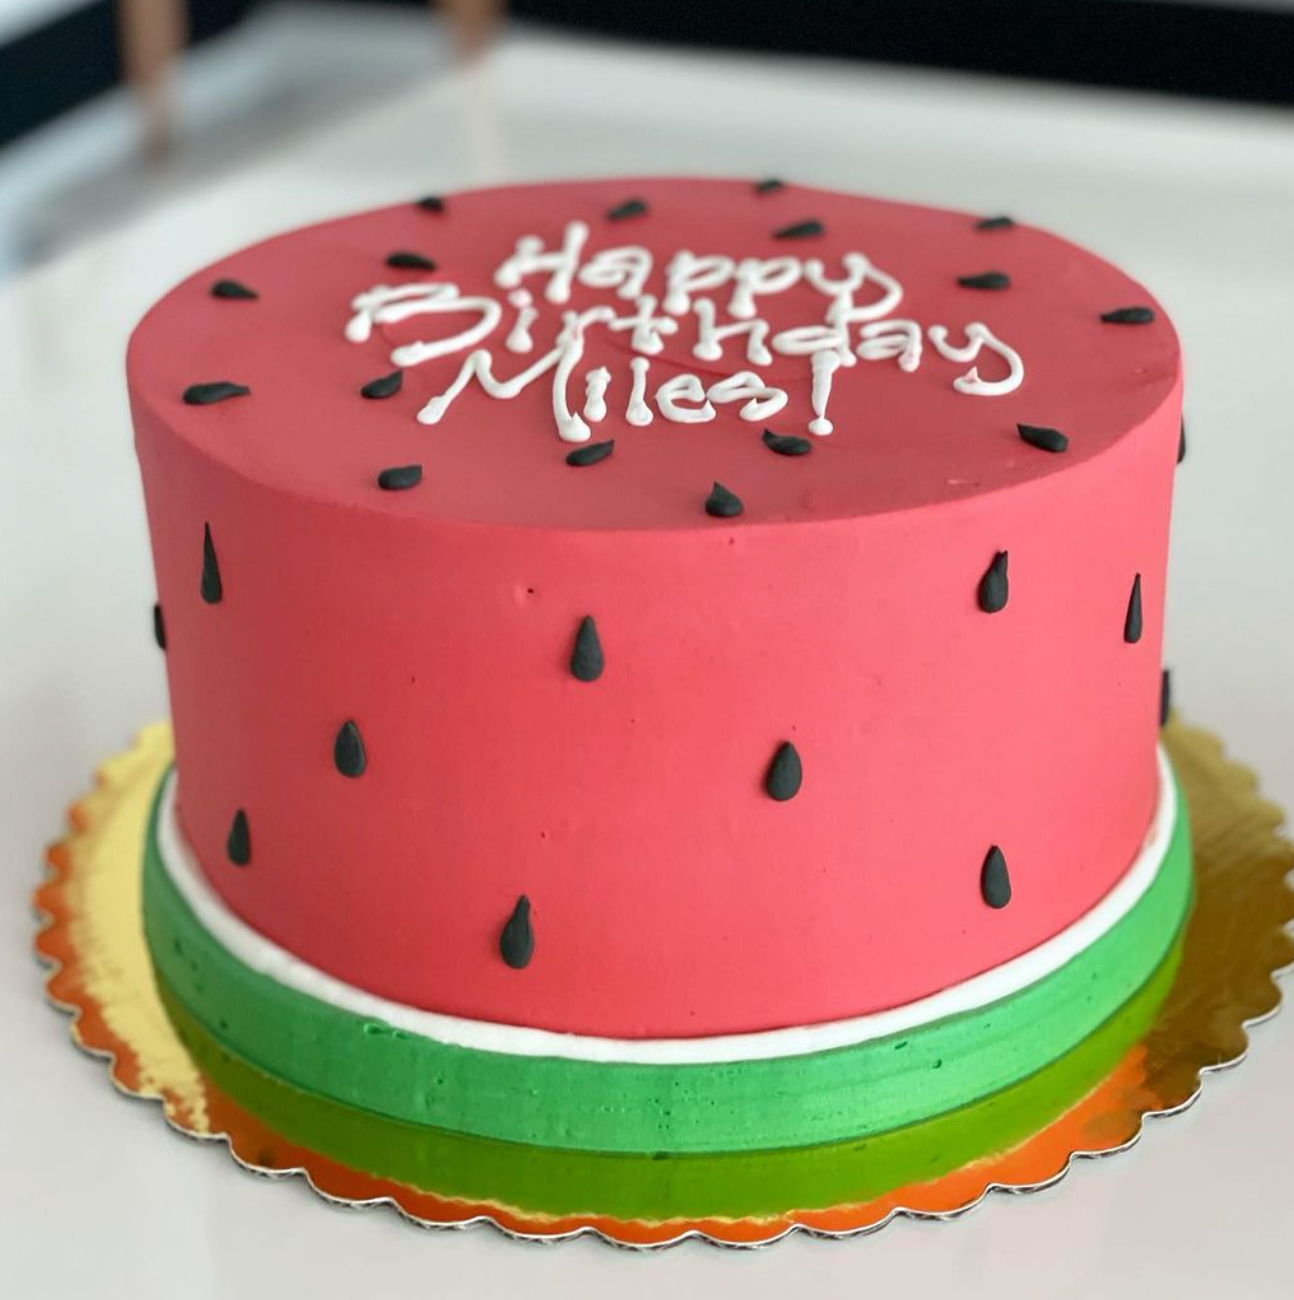 NYC Custom Cakes and Design - UES – The Evercake